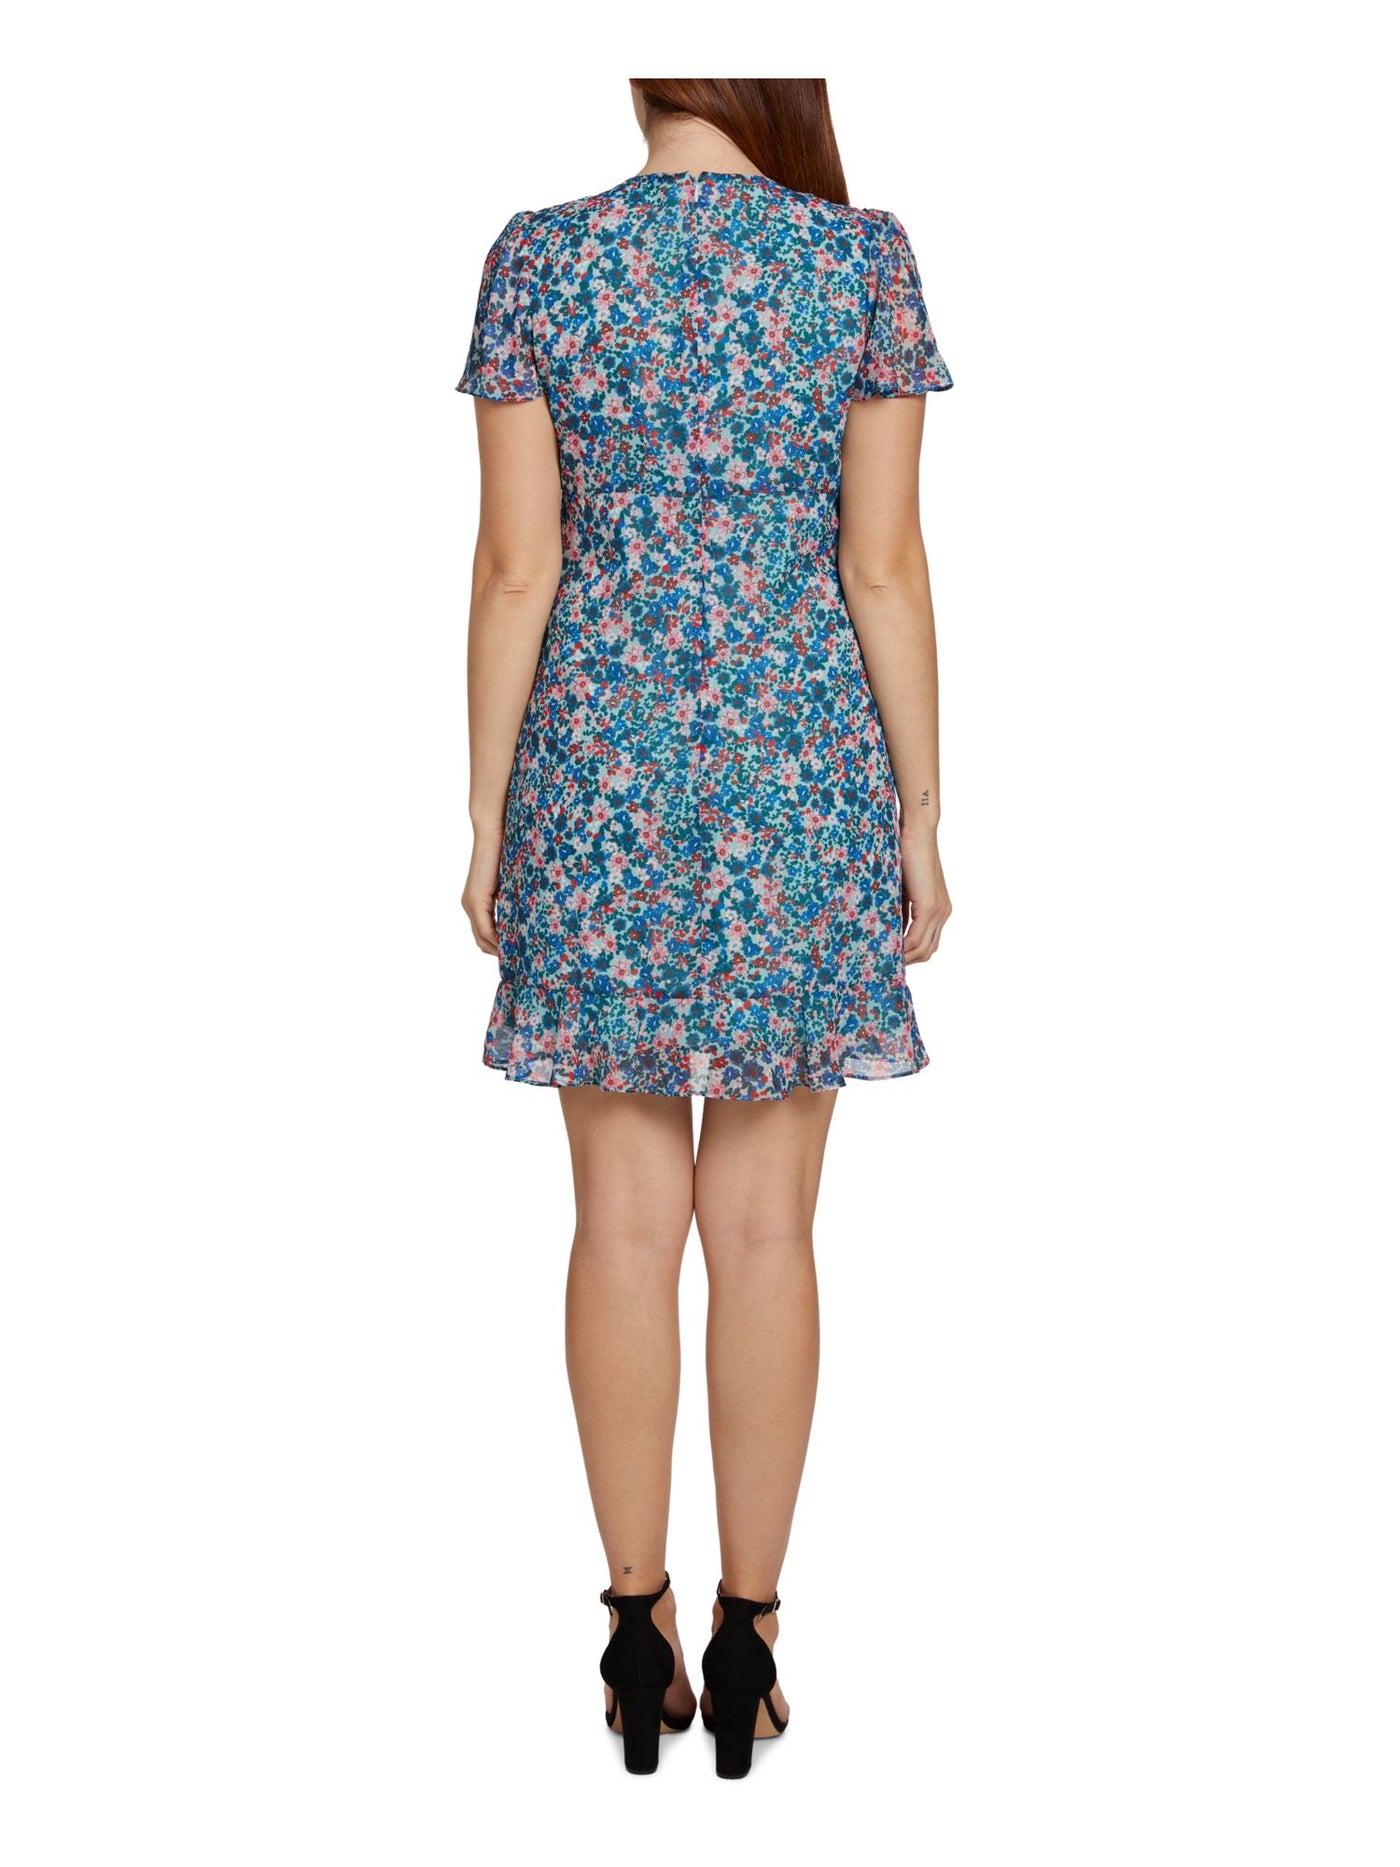 SAGE COLLECTIVE Womens Blue Ruffled Zippered Lined Floral Short Sleeve V Neck Above The Knee A-Line Dress 0P